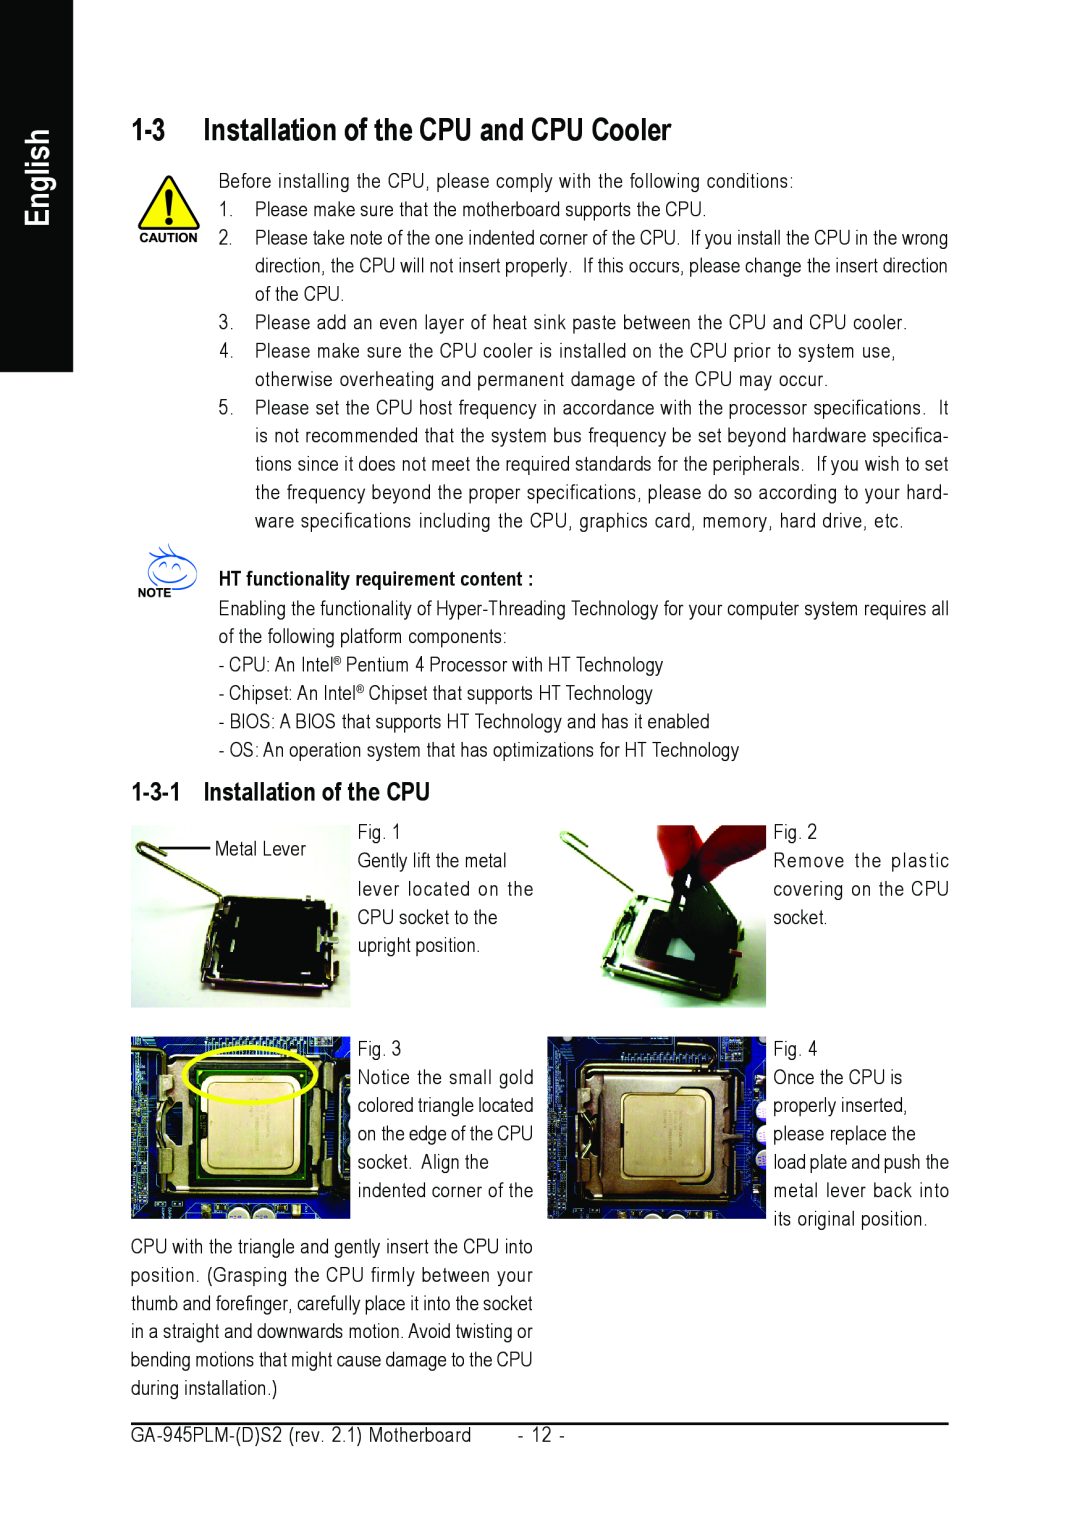 Gigabyte GA-945PLM-(D)S2 user manual Installation of the CPU and CPU Cooler, English 